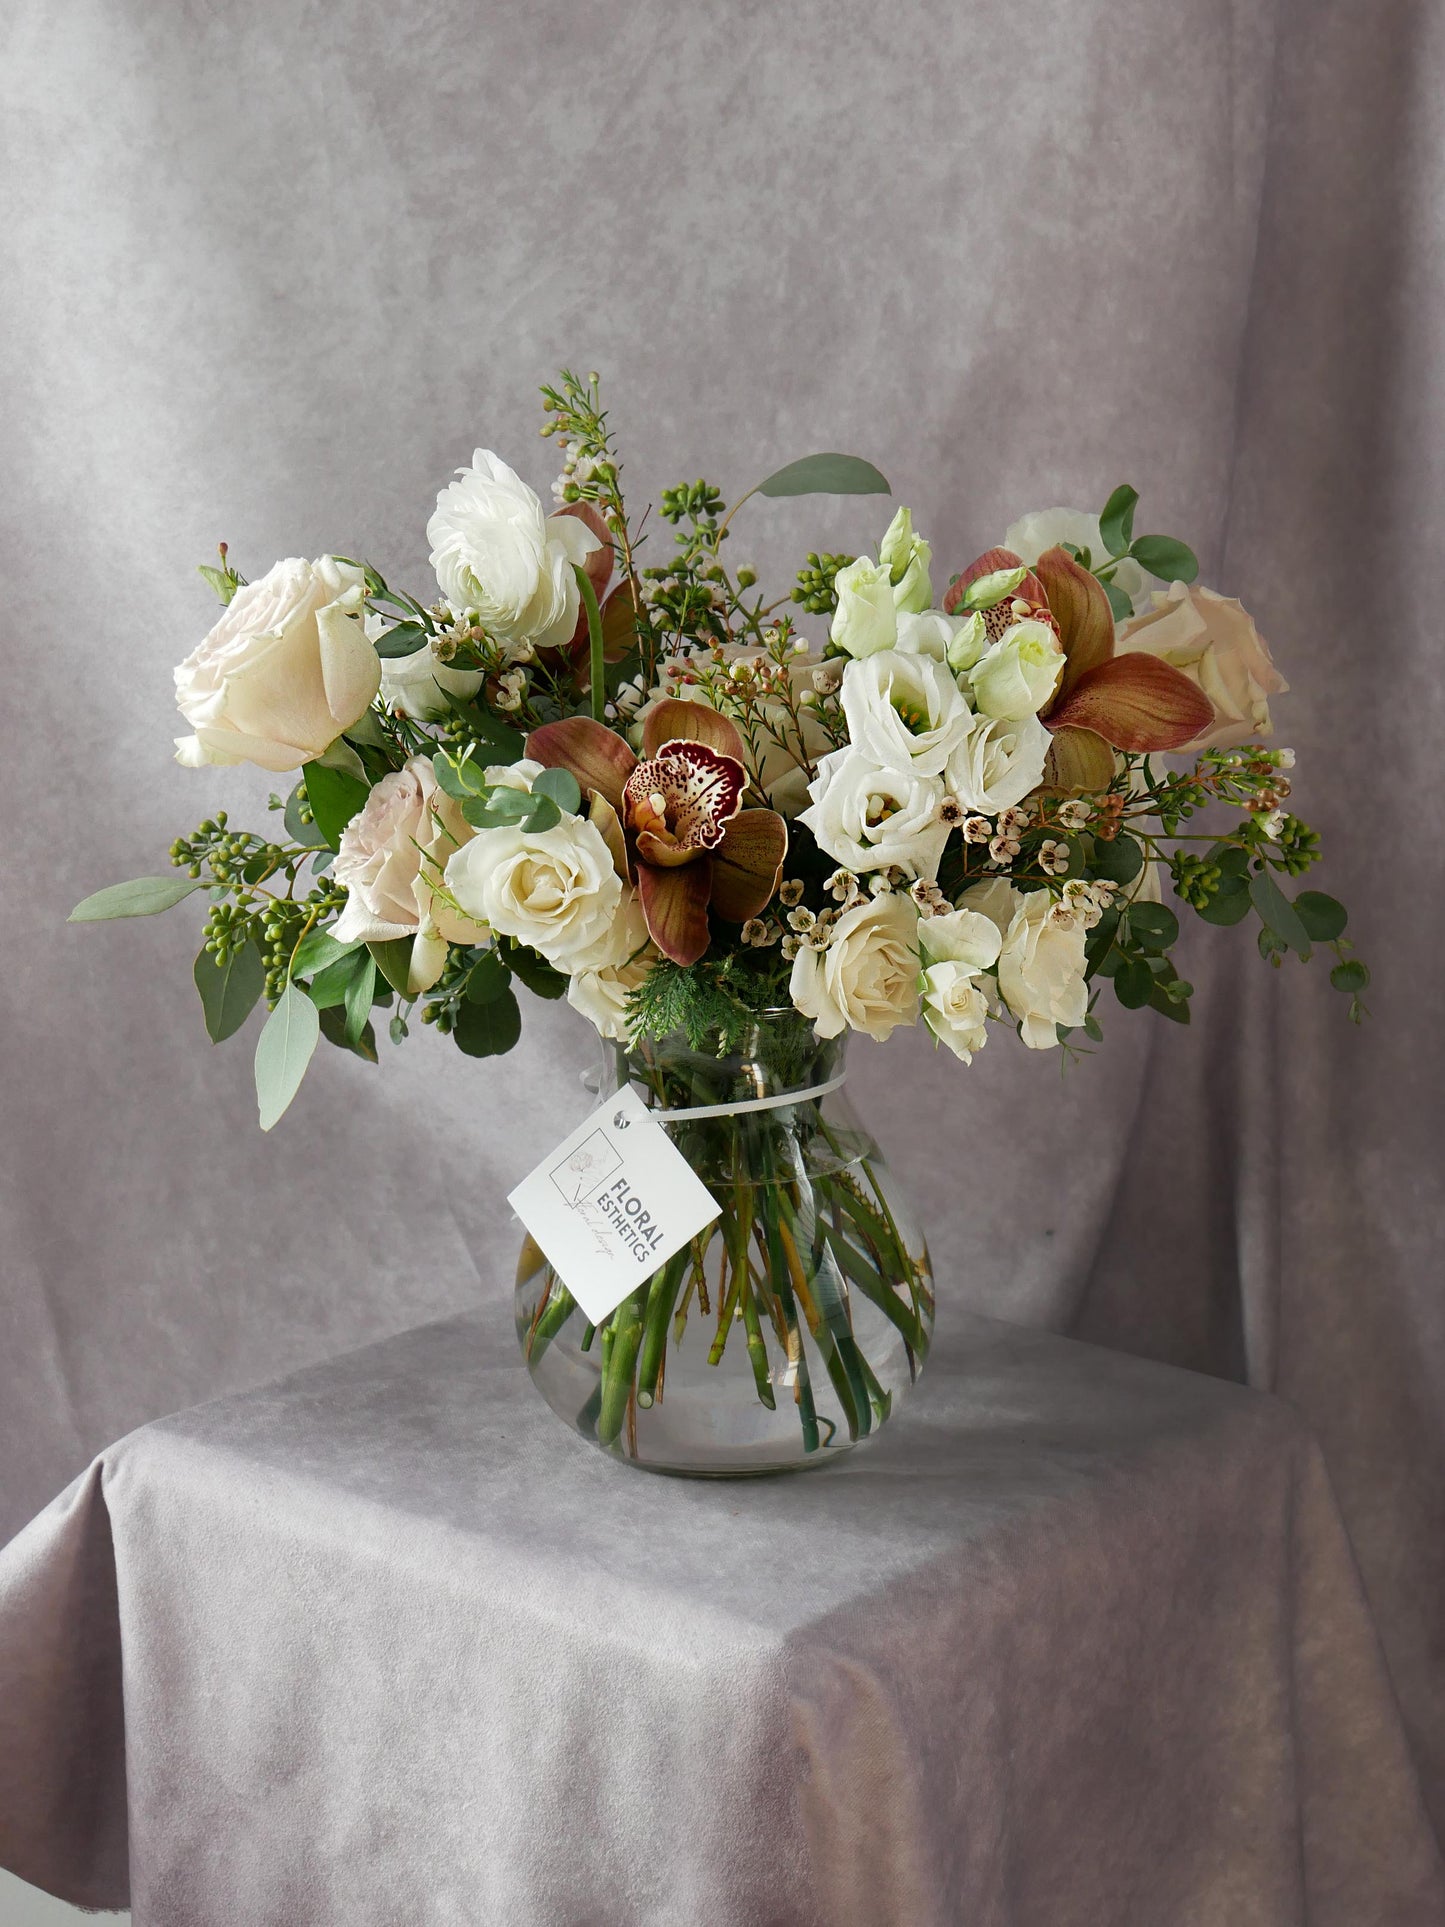 White and coffee color arrangement in clear vase featuring orchids, roses, spray roses, lizianthus, eucalyptus, wax flower and more